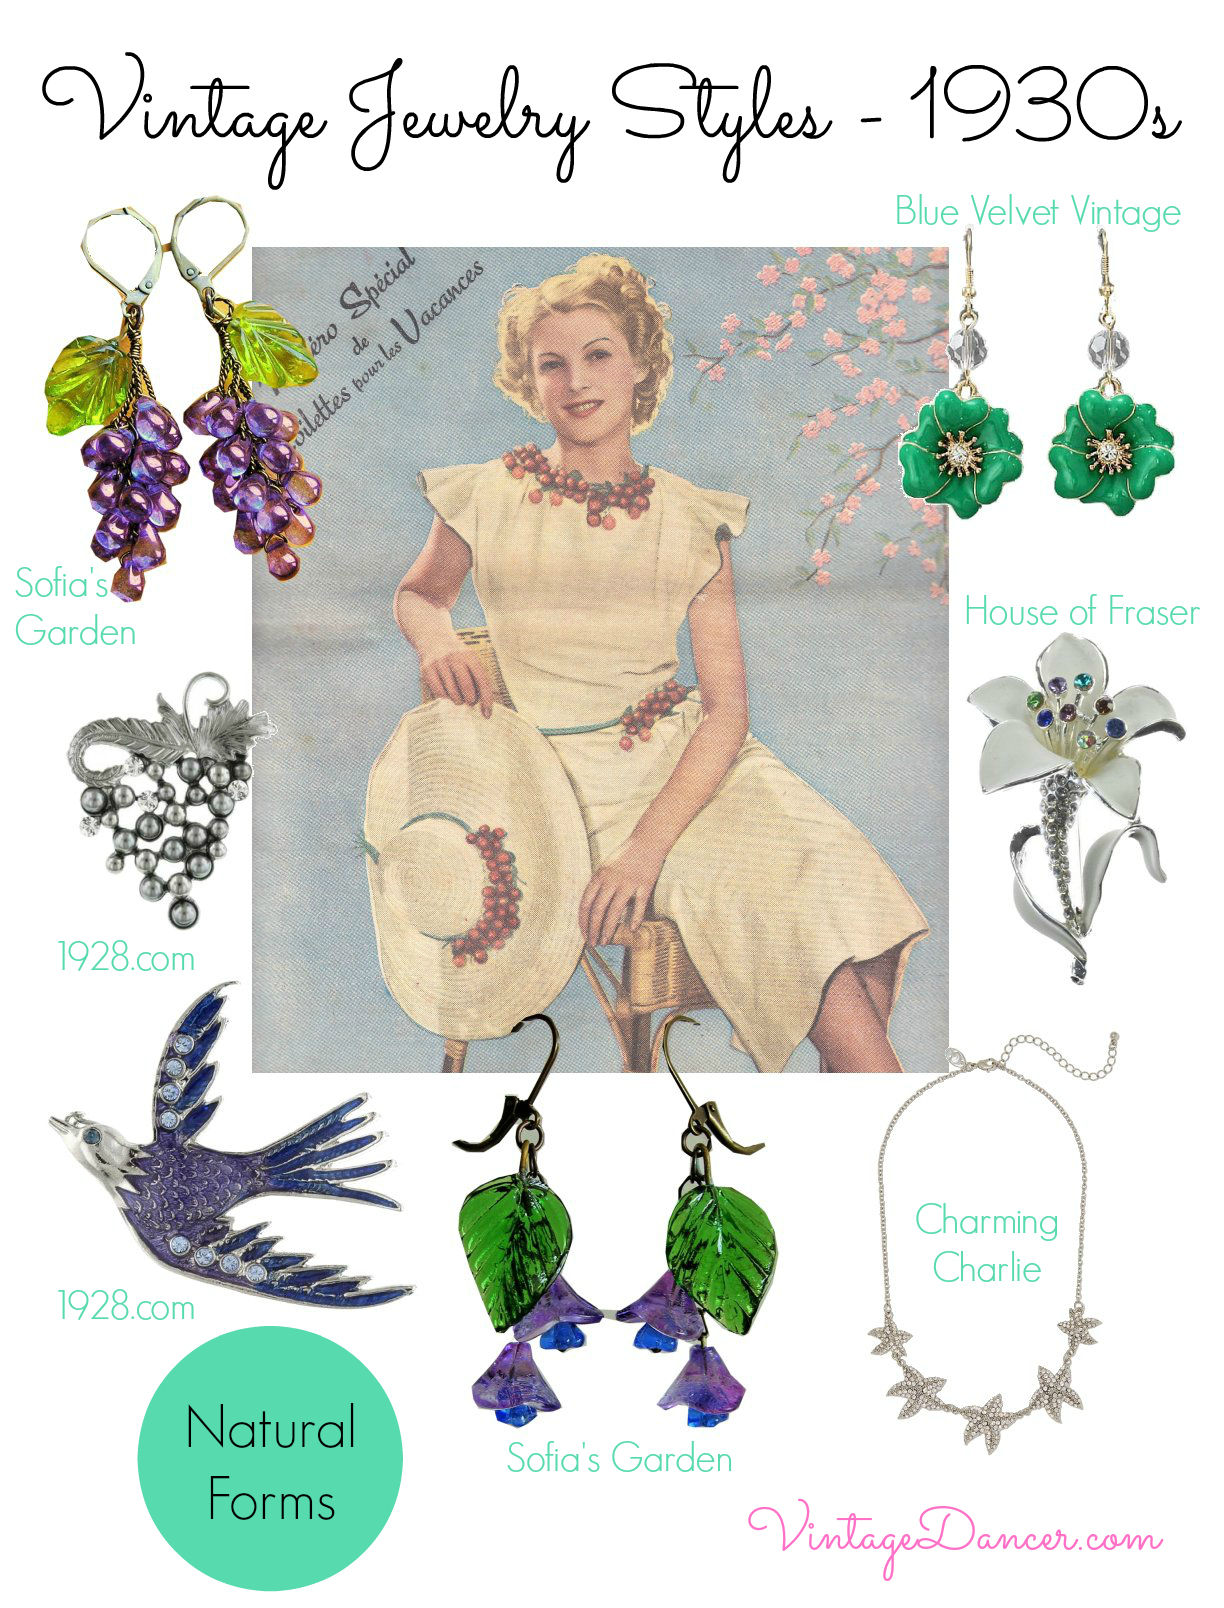 1930s Jewelry Styles and Trends